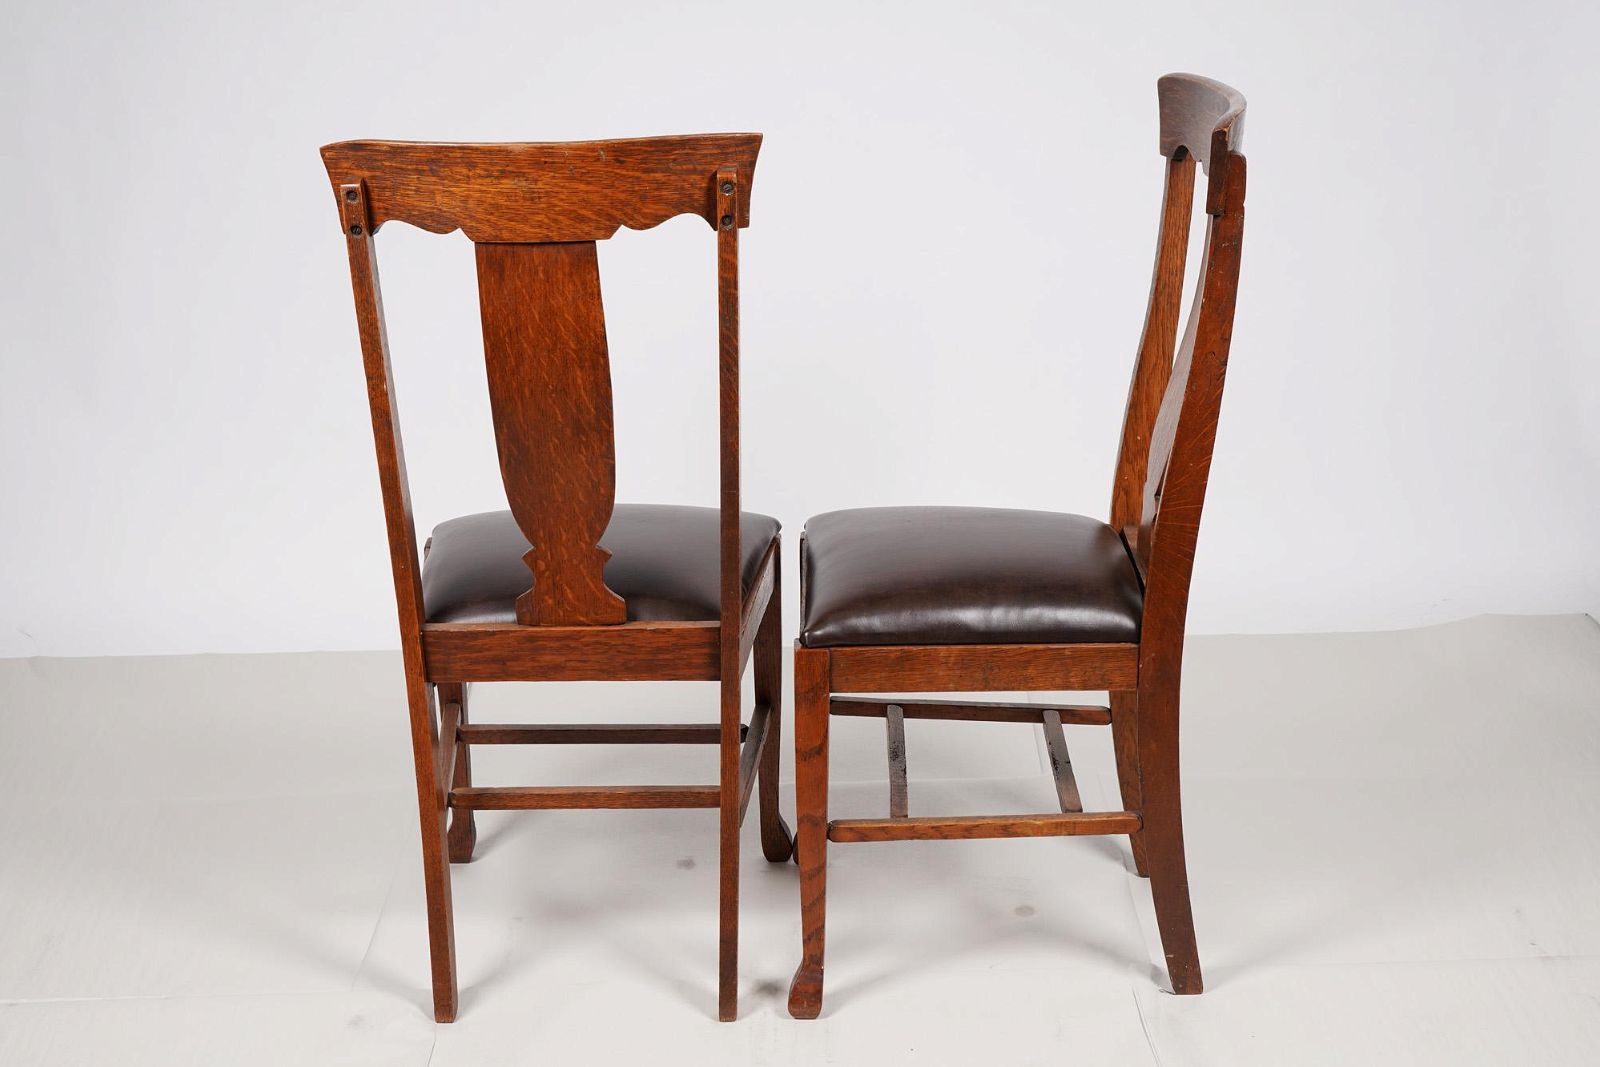 AF2-160: ANTIQUE SET OF 4 FOUR EARLY 20TH CENTURY AMERICAN OAK DINING CHAIRS